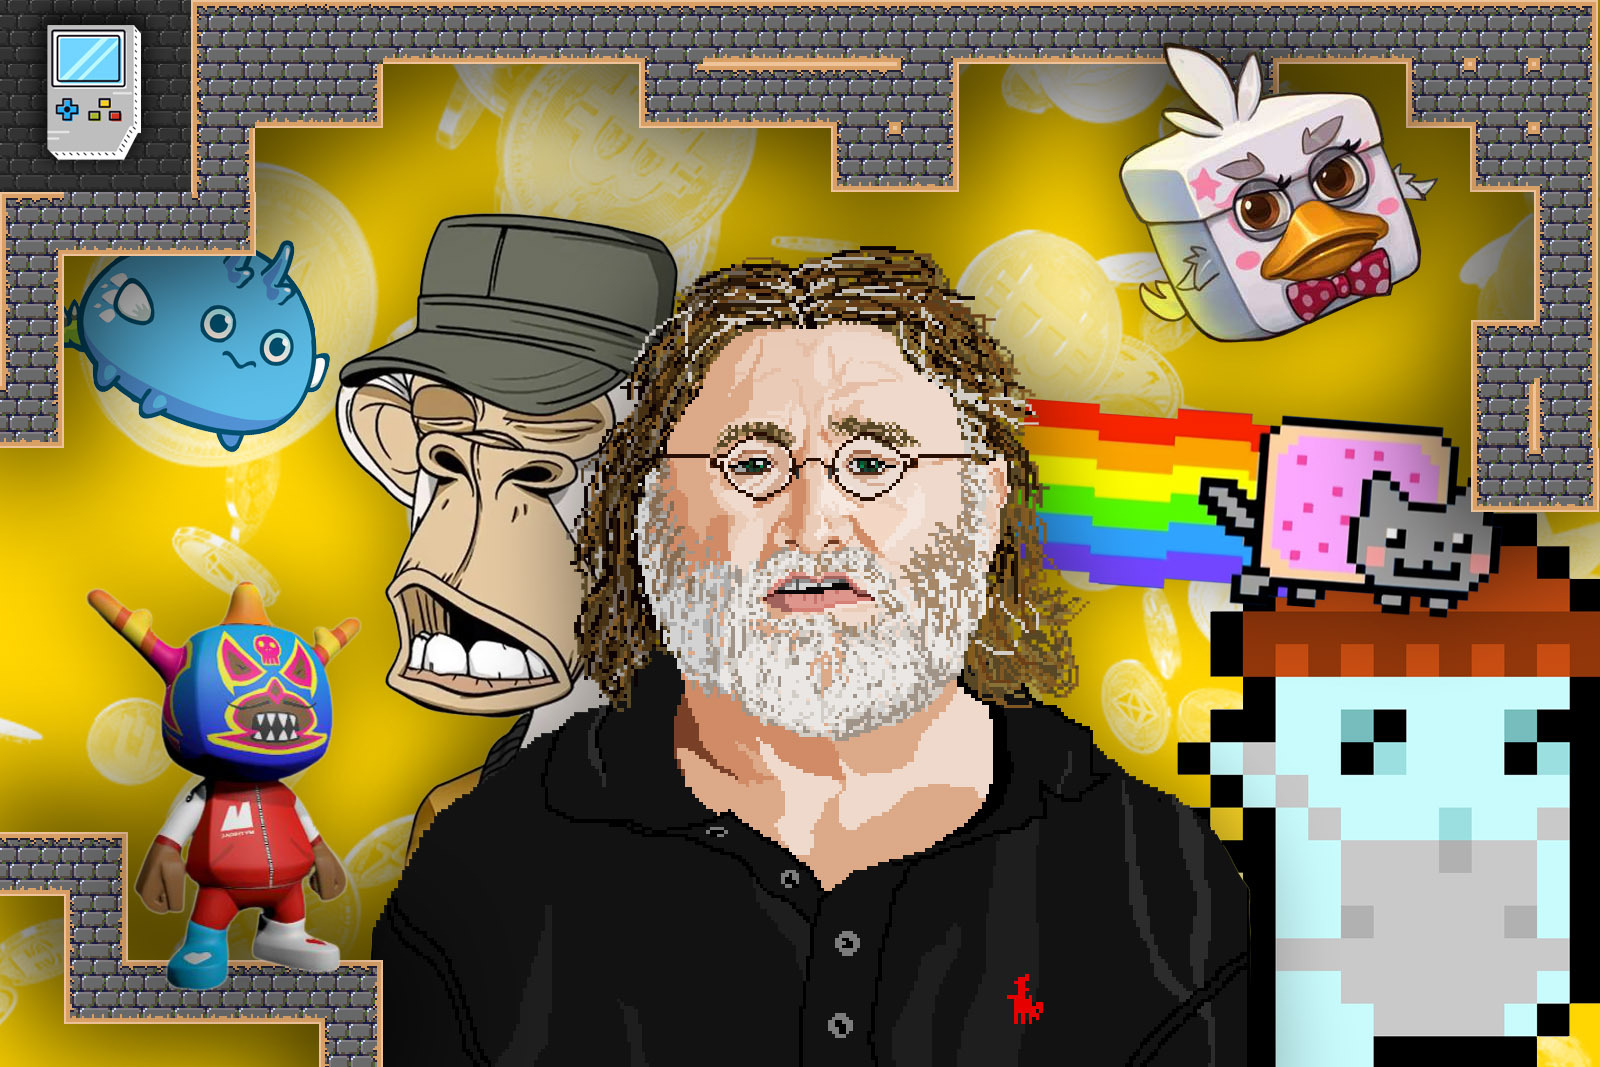 Gabe Newell (Valve/Steam) will have to testify in an antitrust trial -  Softonic